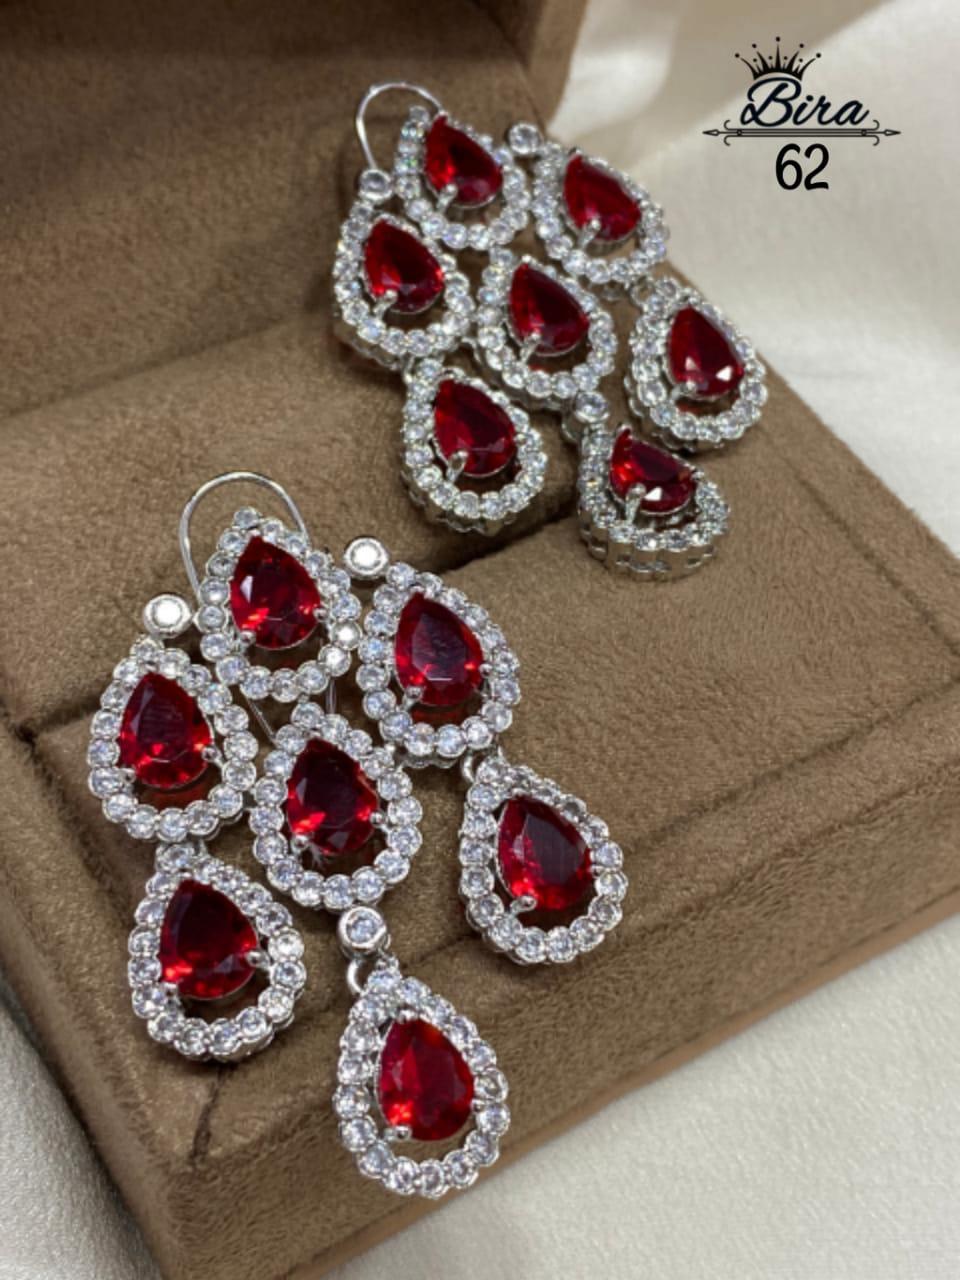 Discover more than 178 blood red ruby earrings super hot